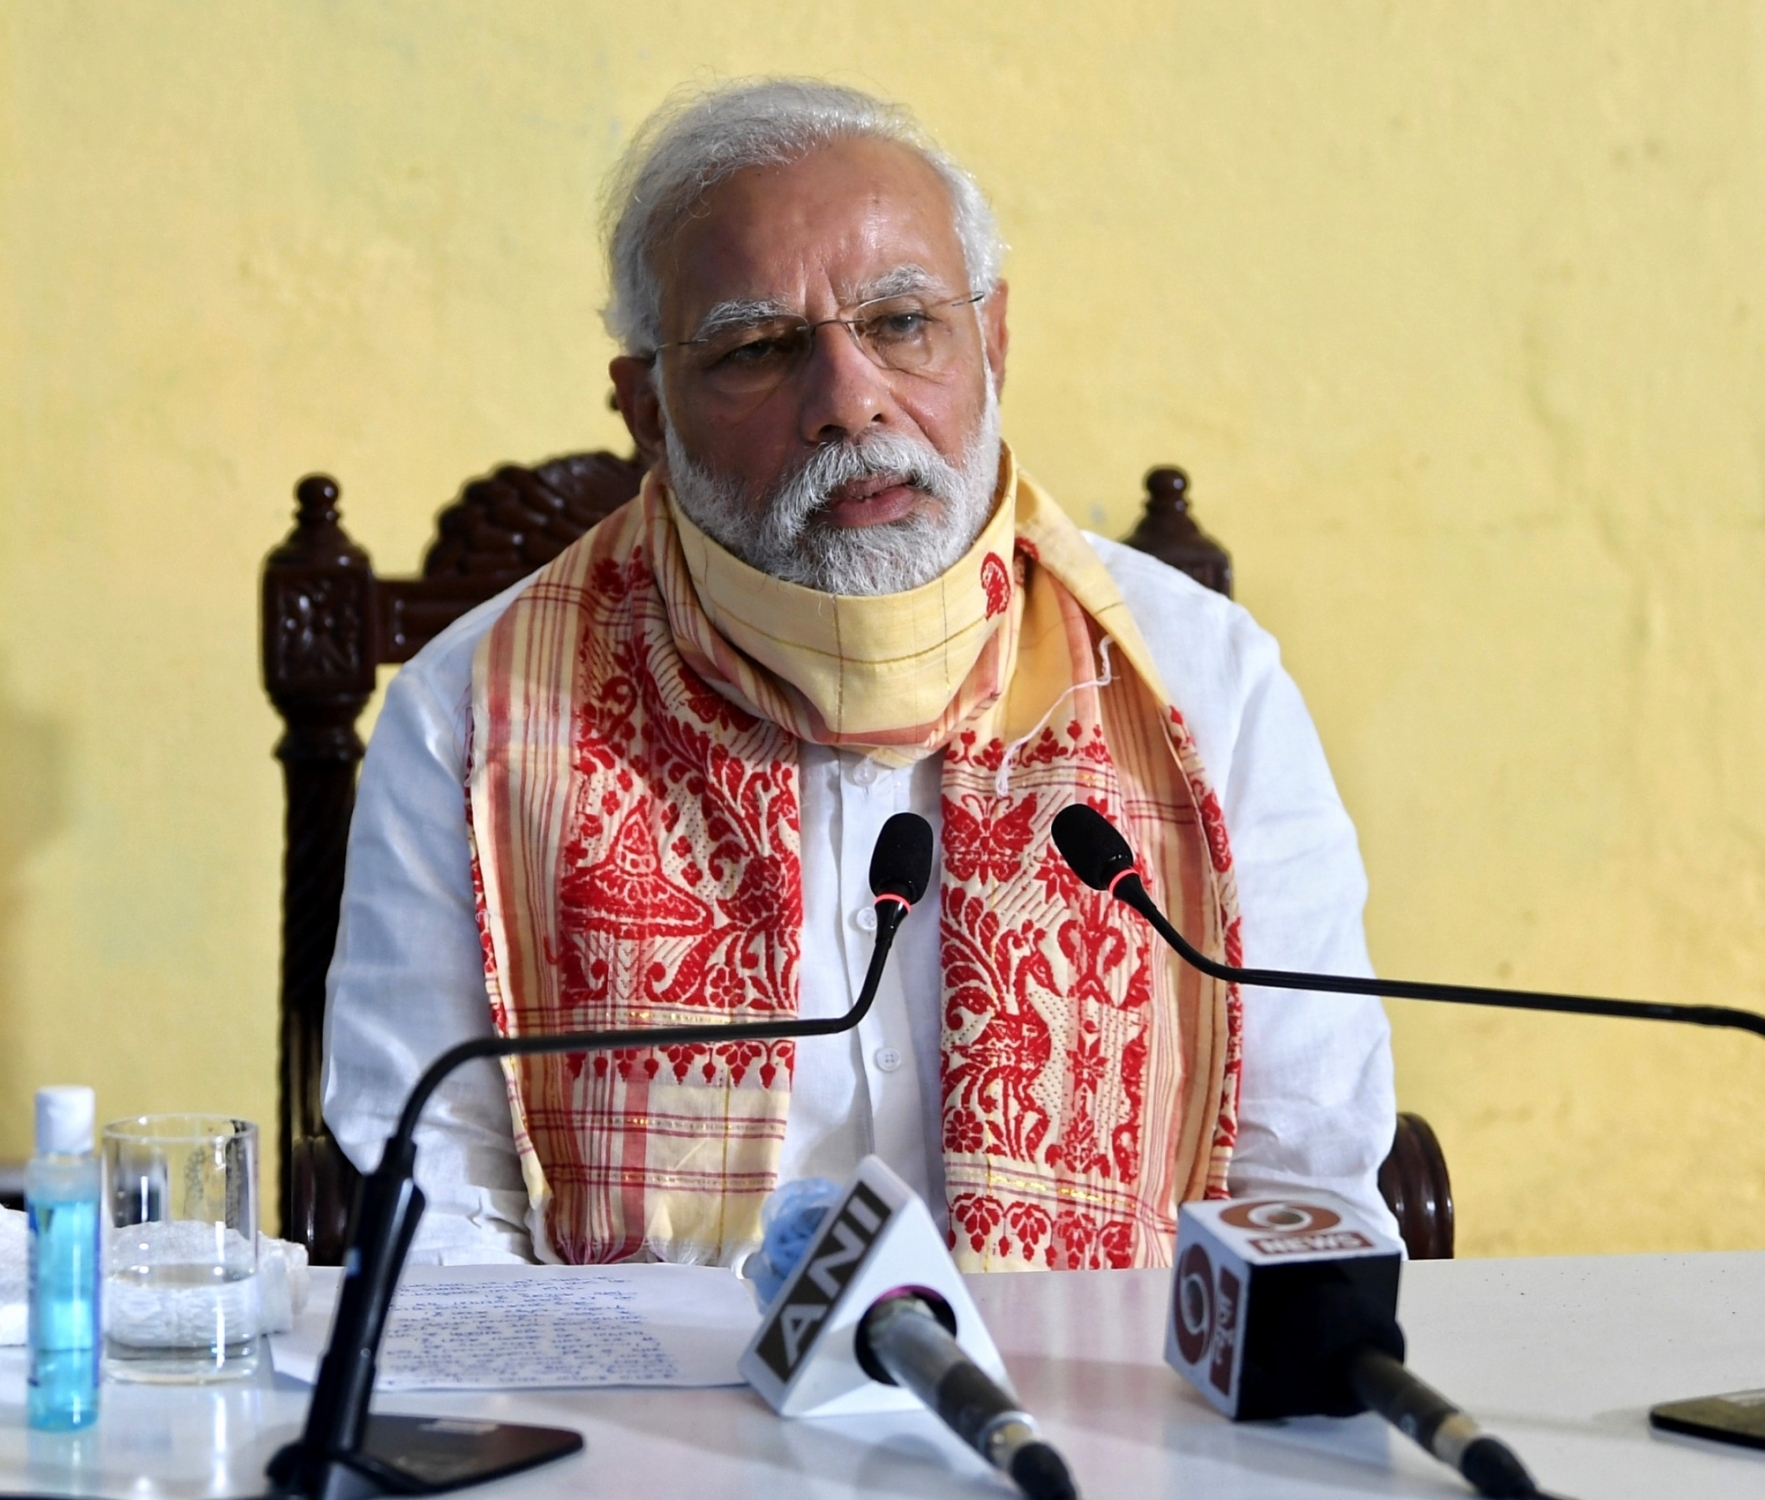 Kolkata: Prime Minister Narendra Modi holds review meeting with the officials at Basirhat, West Bengal after his aerial survey of cyclone Amphan-affected areas of the state, on May 22, 2020. (Photo: IANS/PIB) by .